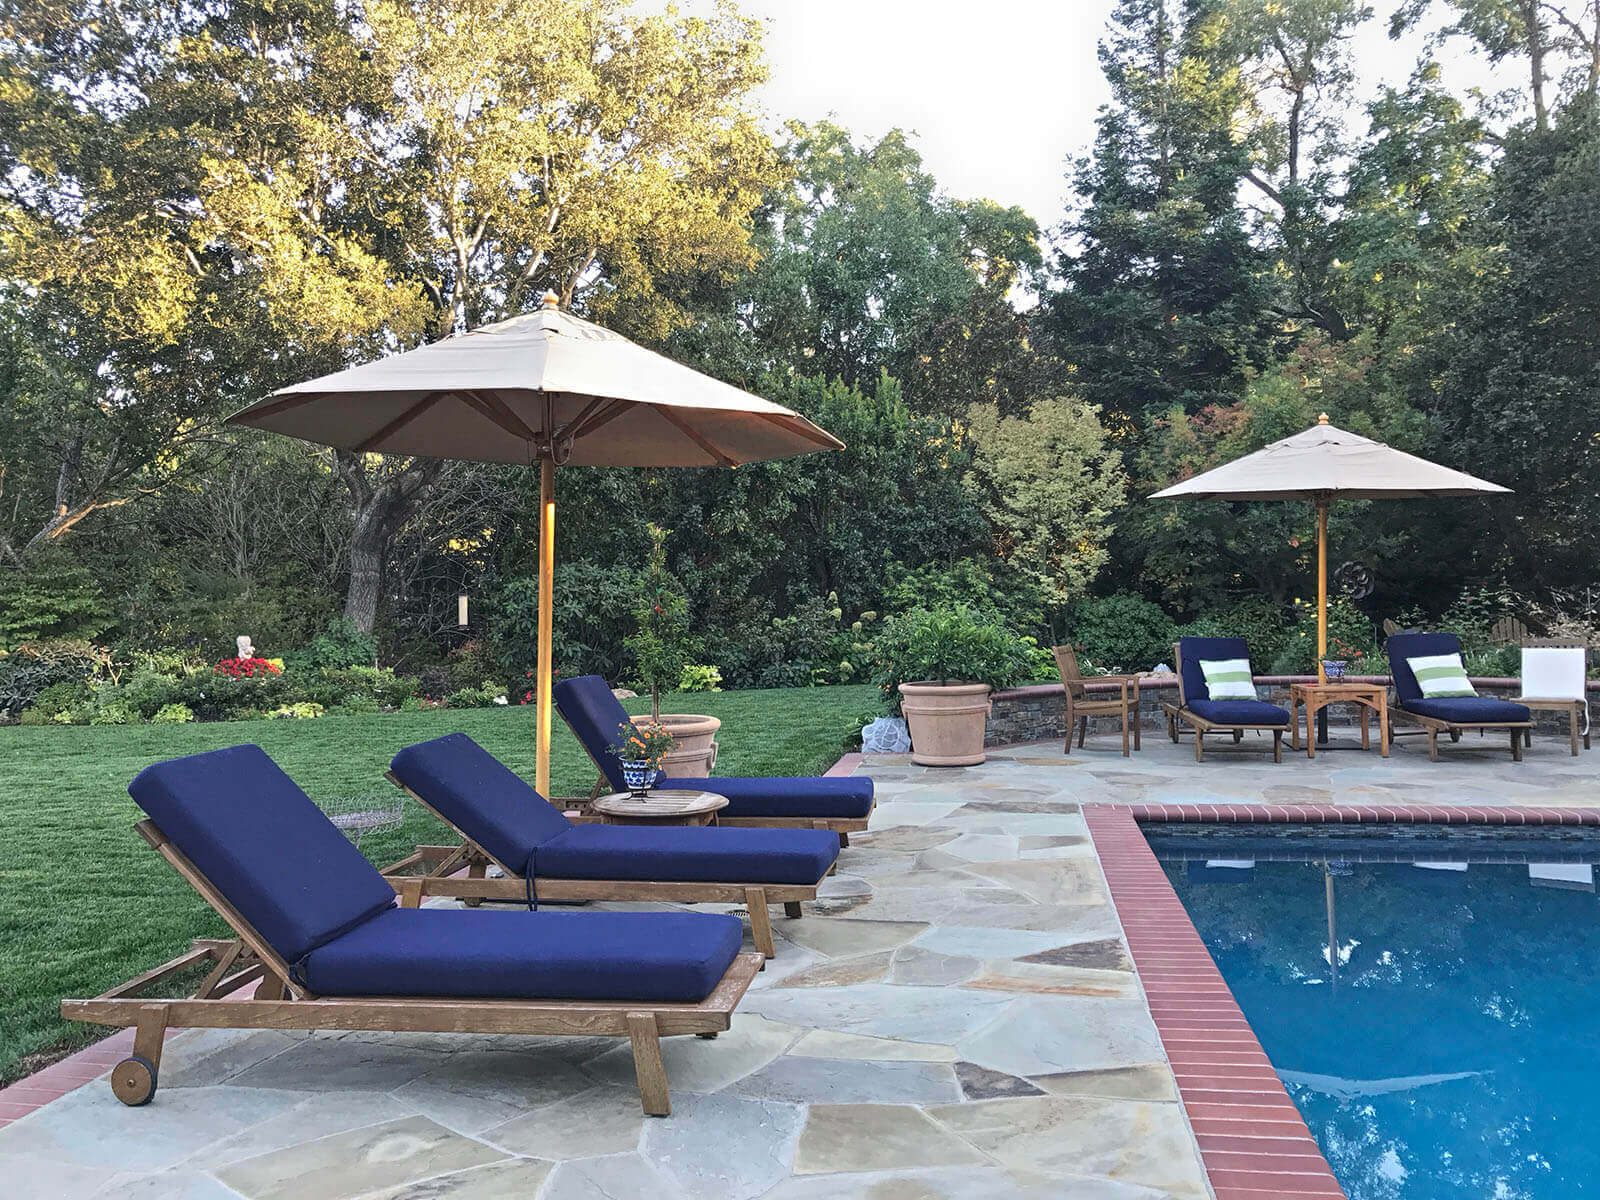 Brick-lined pool set in stone tiled patio with cobalt poolside lounges